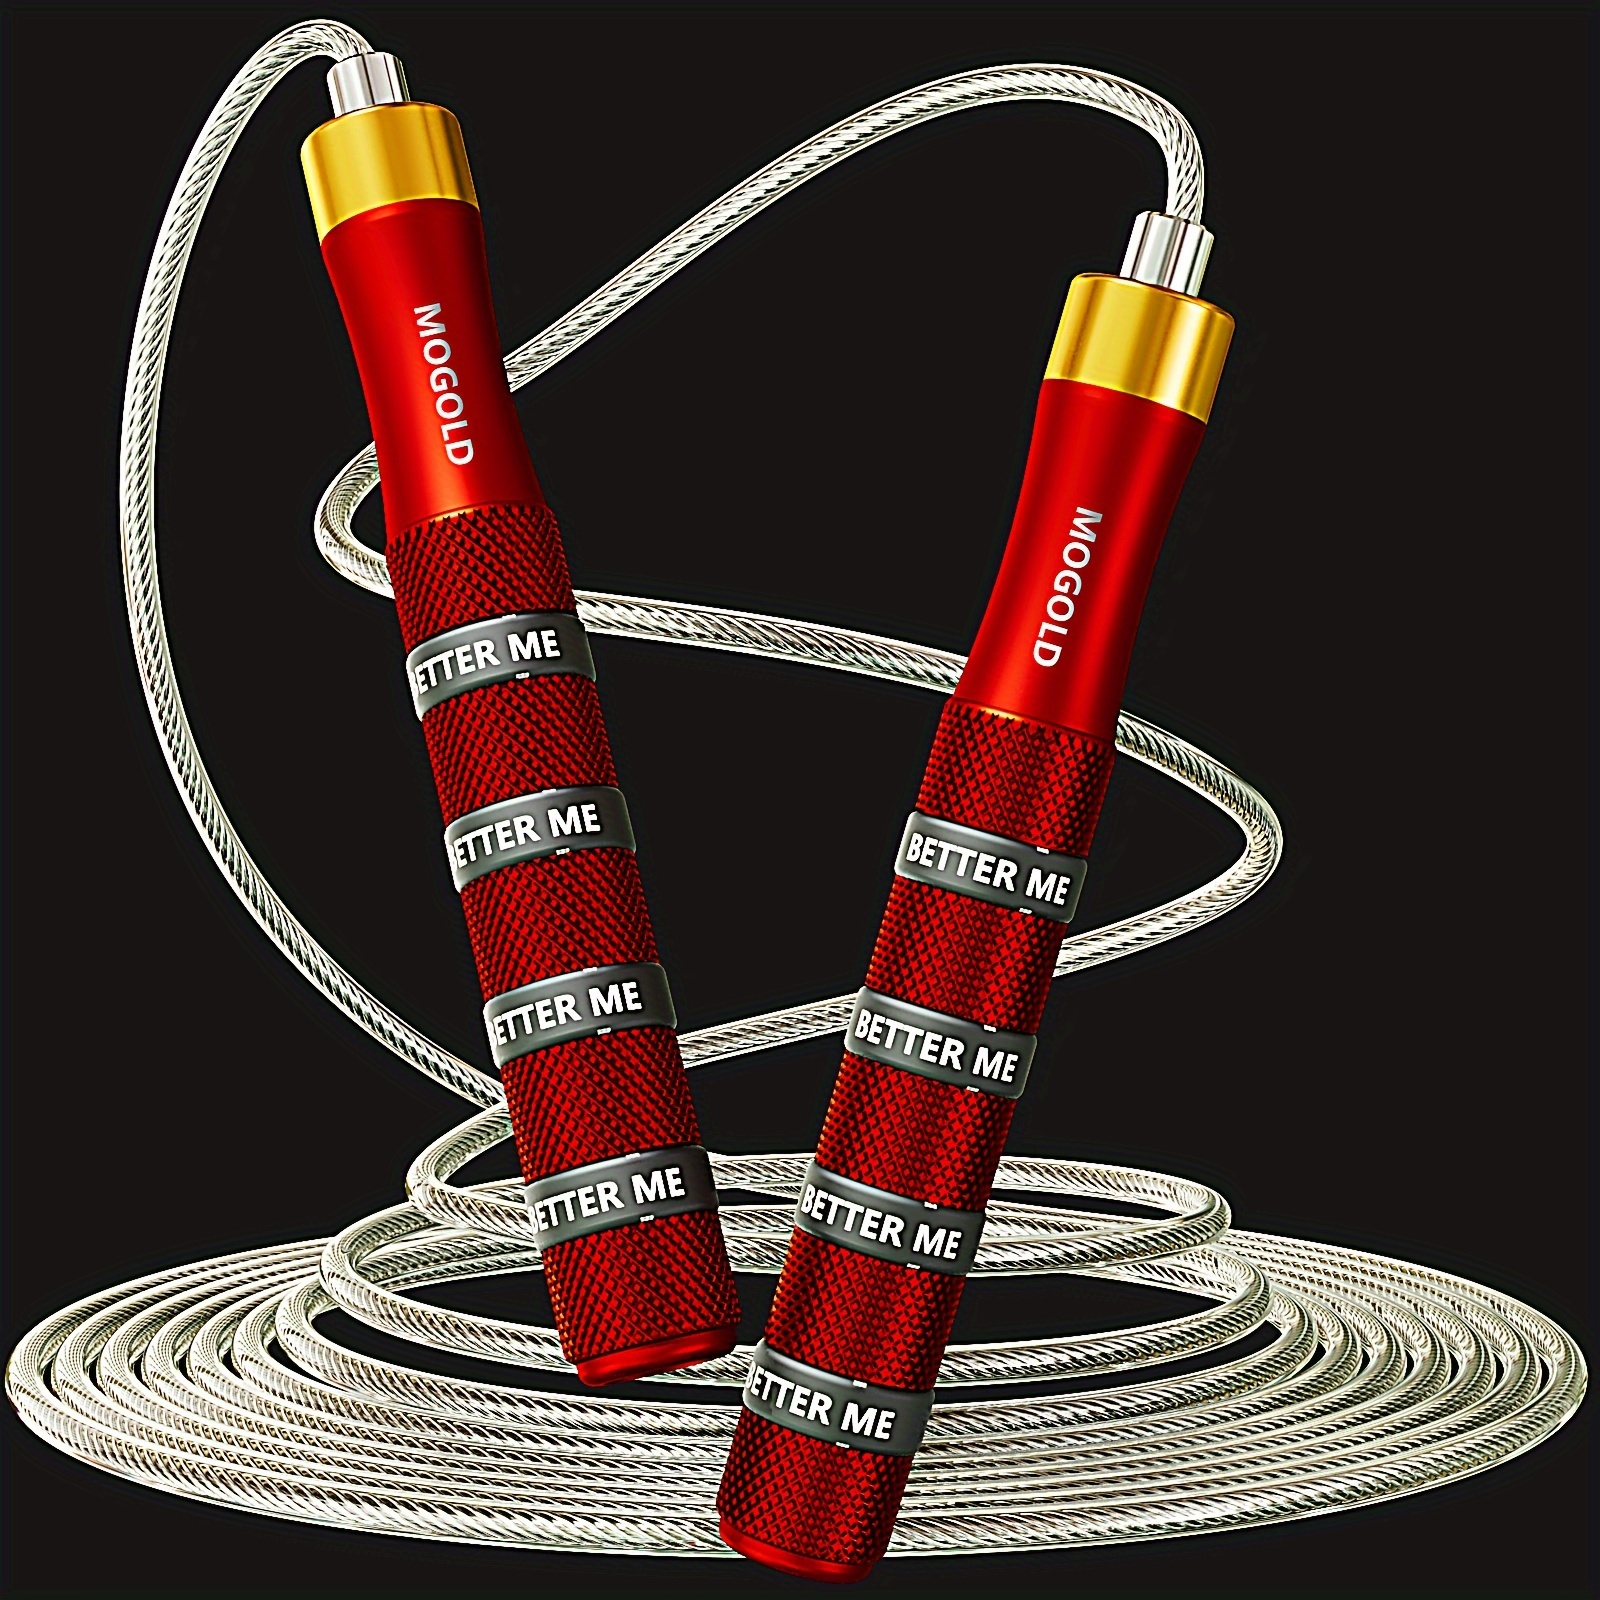 

Mogold Professional Adjustable Speed Jump Rope - Exercise And Fitness Skipping Rope For Men And Women, Uncharged, Aluminum Alloy Handle, Suitable For Ages 14+ - 1pc